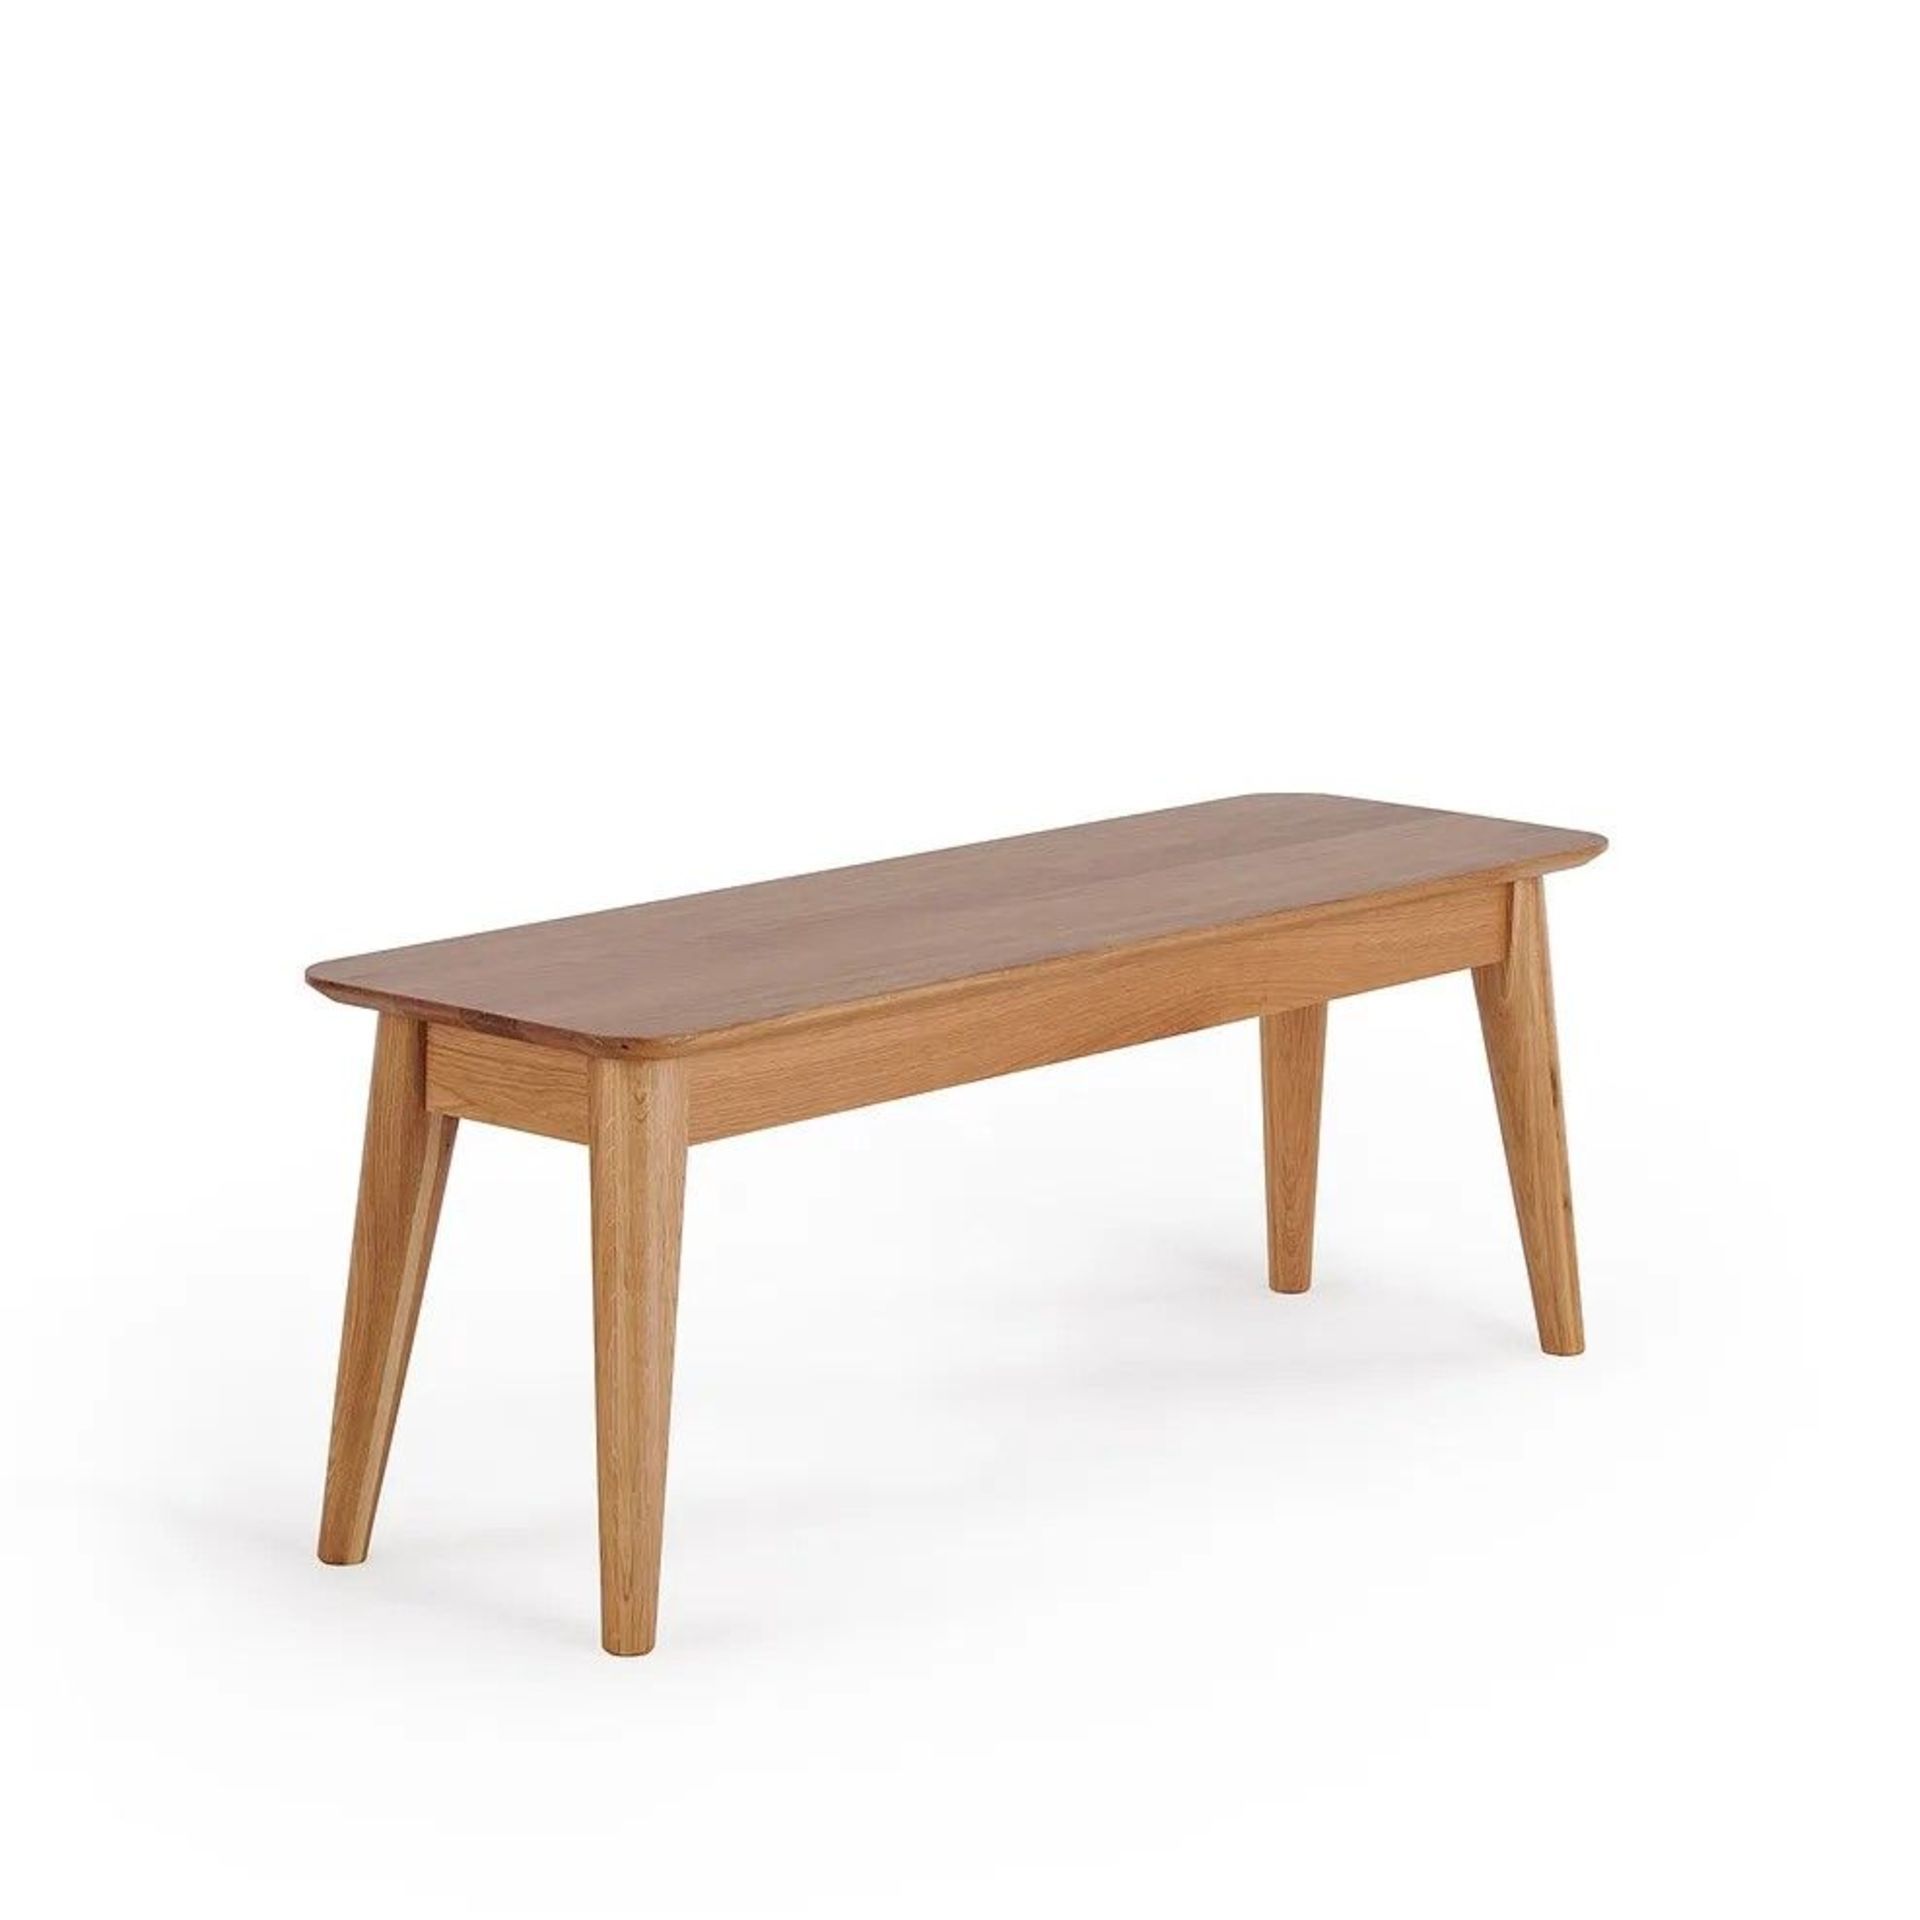 New Boxed - Oscar Natural Solid Oak Bench. 120cm Long. RRP £290. For a more open seating environment - Image 2 of 2